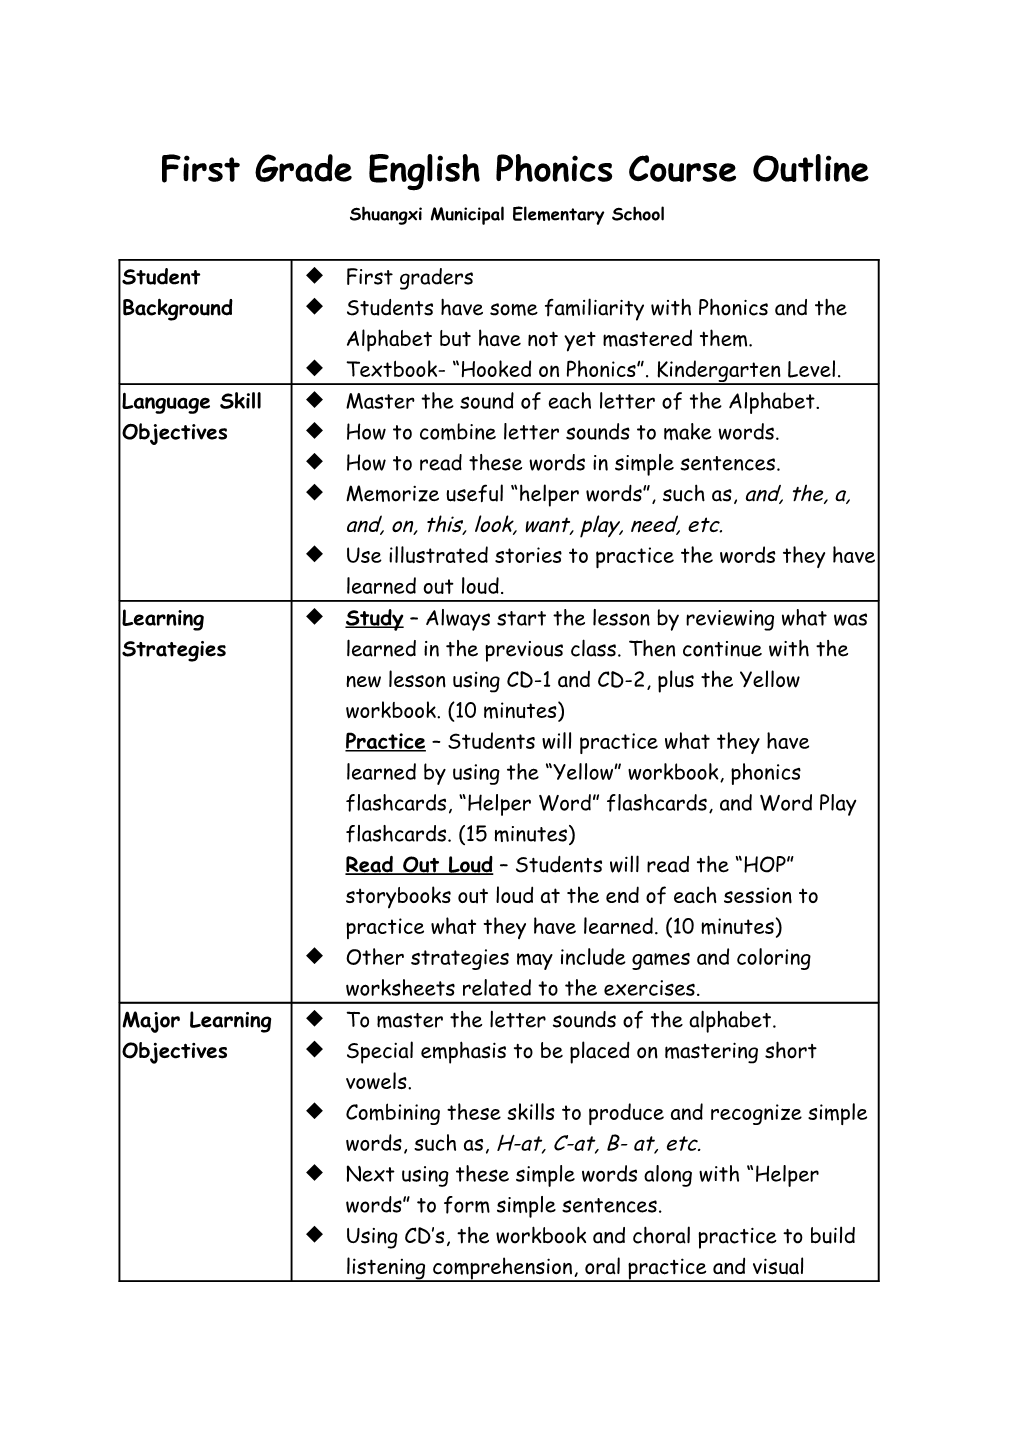 First Grade English Phonics Course Outline